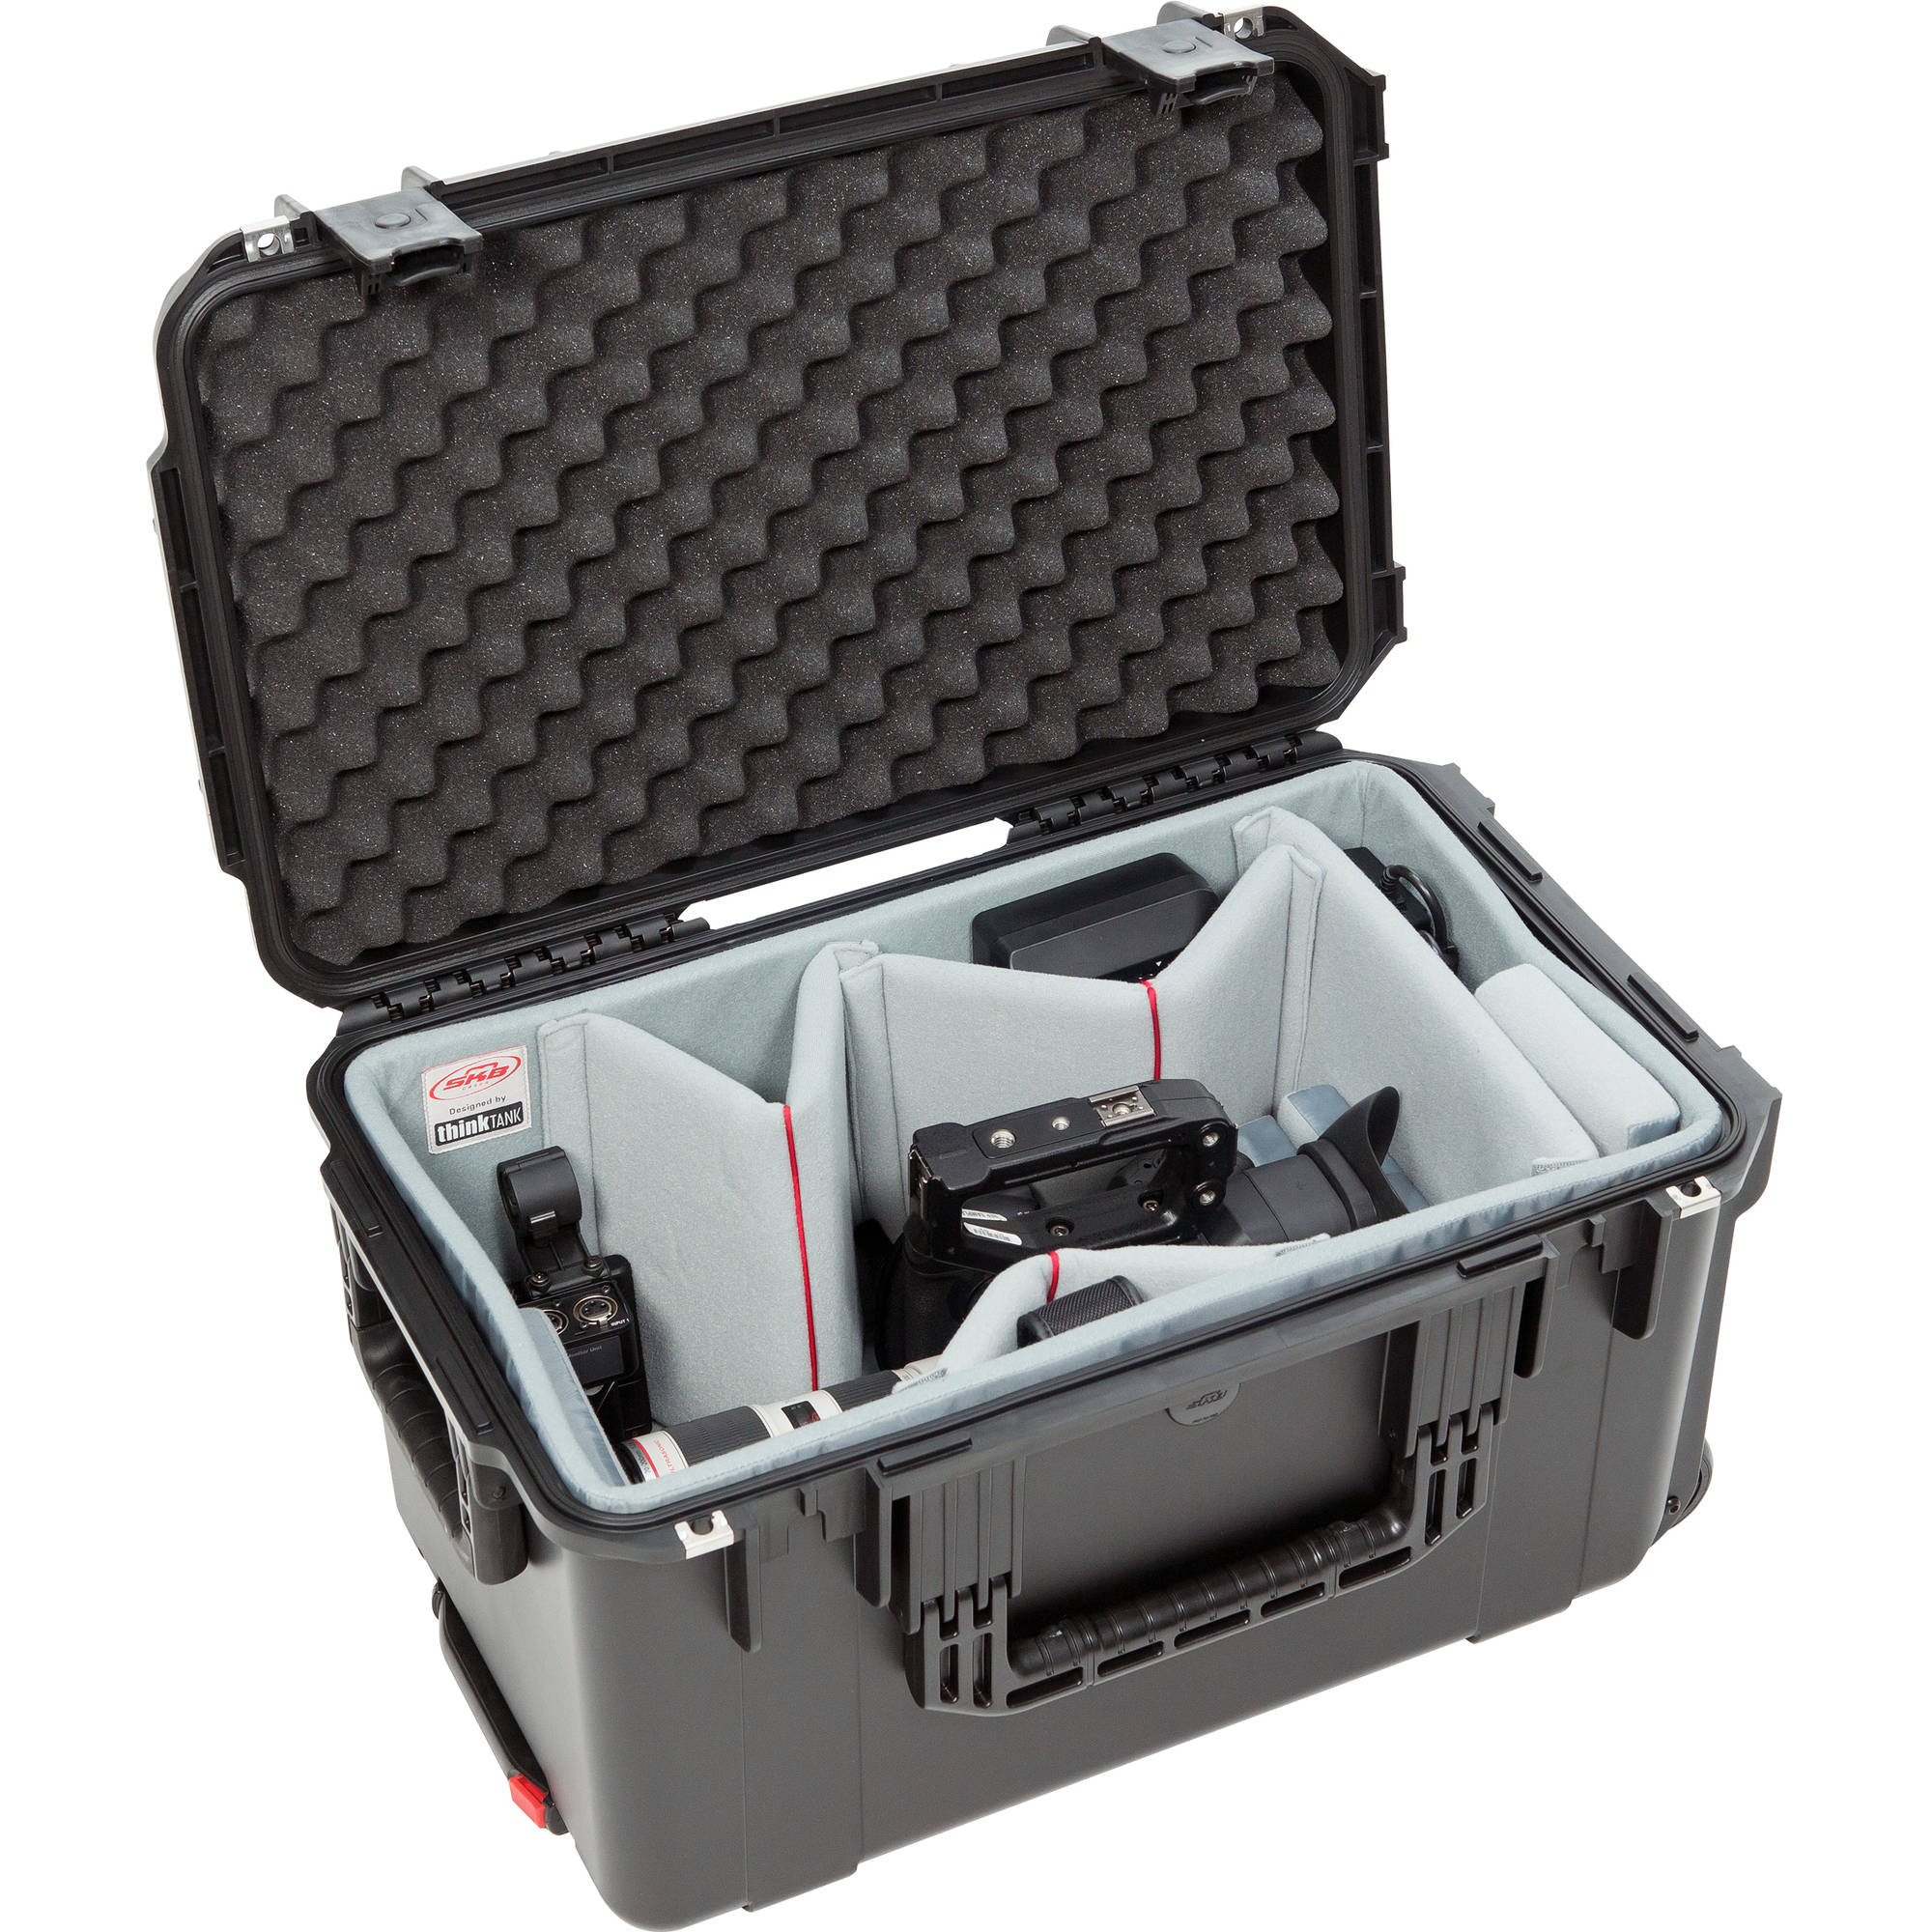 SKB Cases iSeries 2213-12 Case with Think Tank Video Dividers